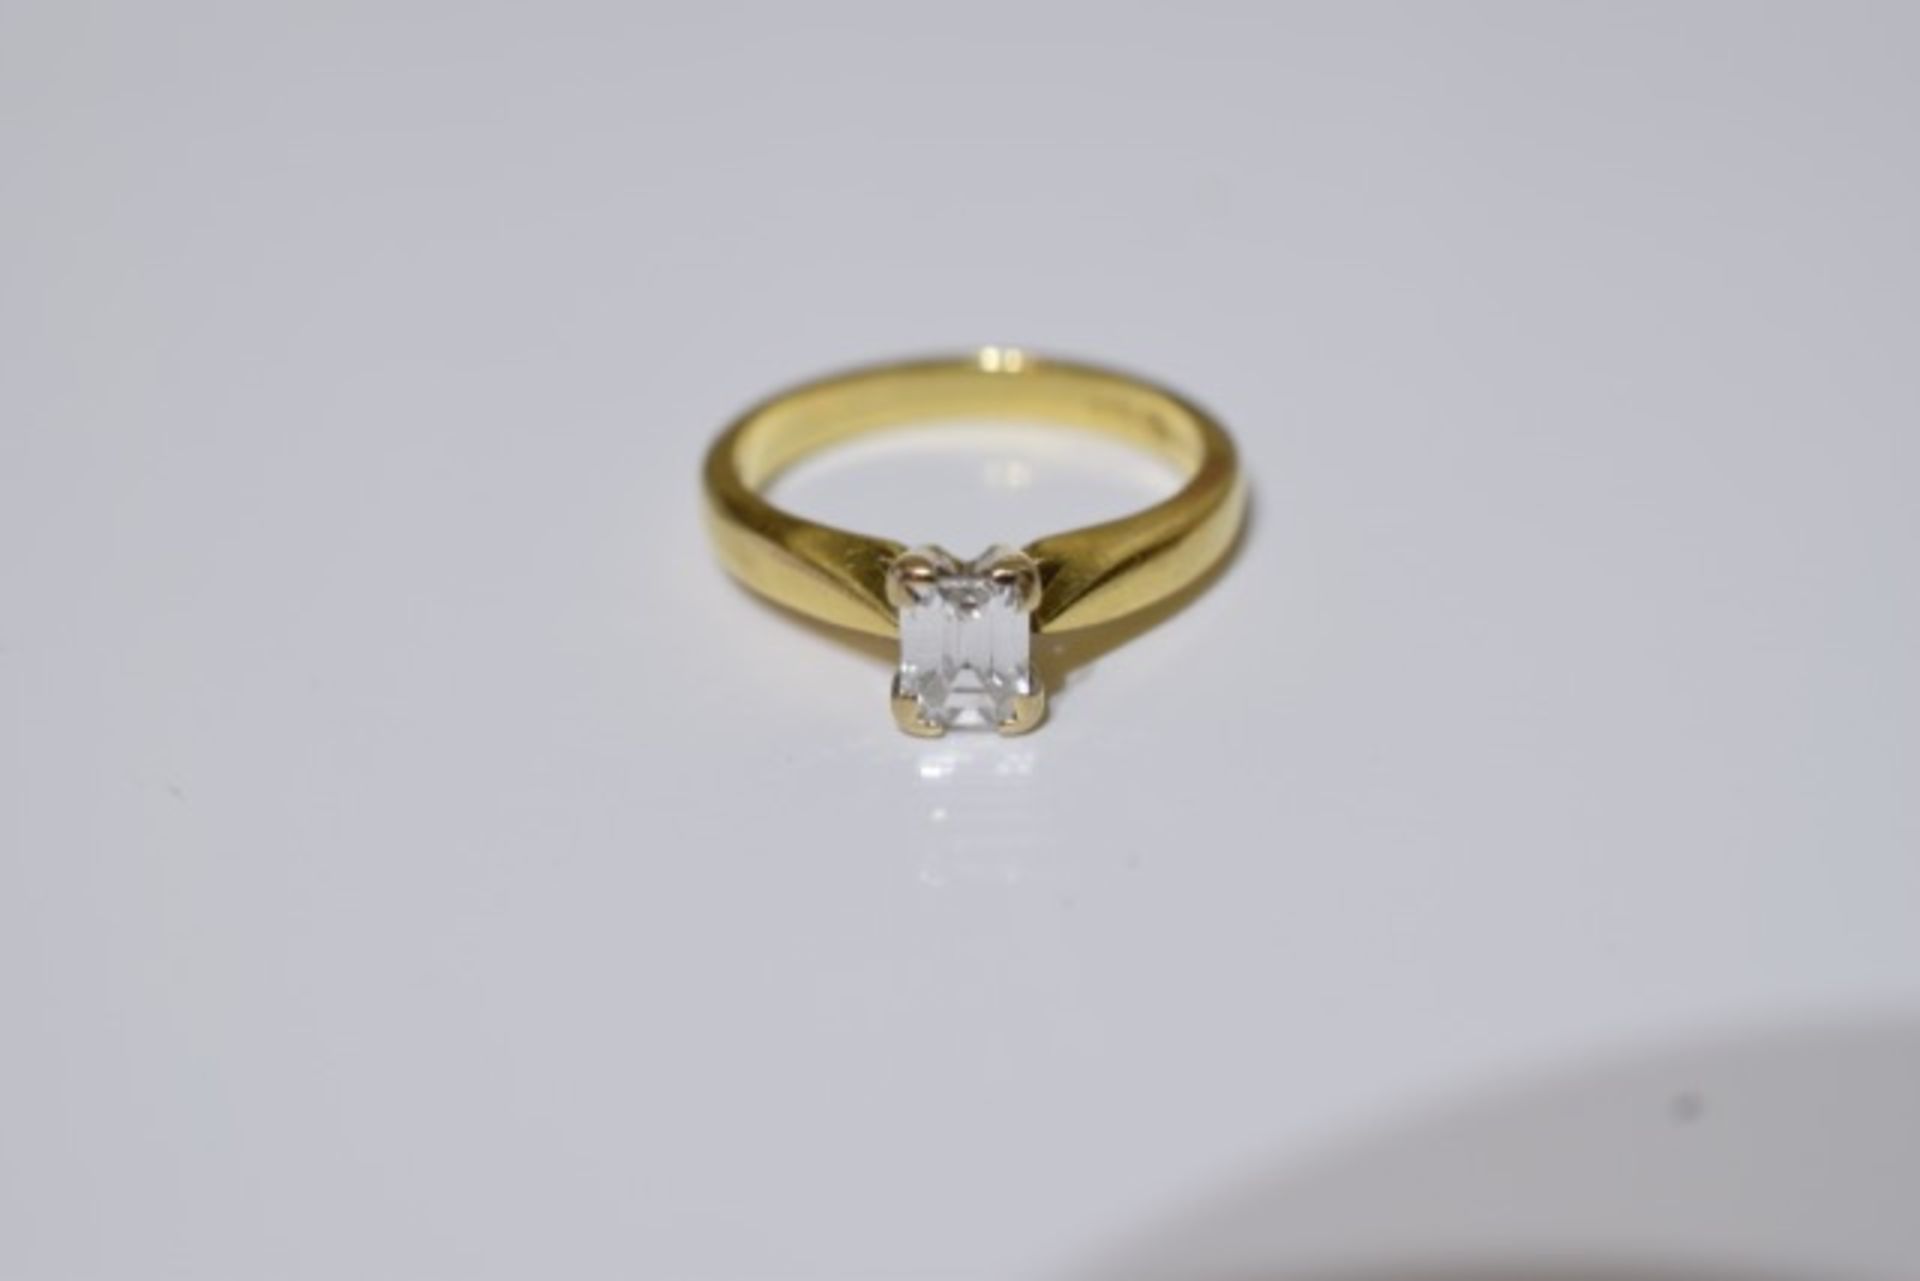 18ct Gold Emerald cut diamond ring, Size J, Clear without inclusions visible to the eye. - Image 2 of 5